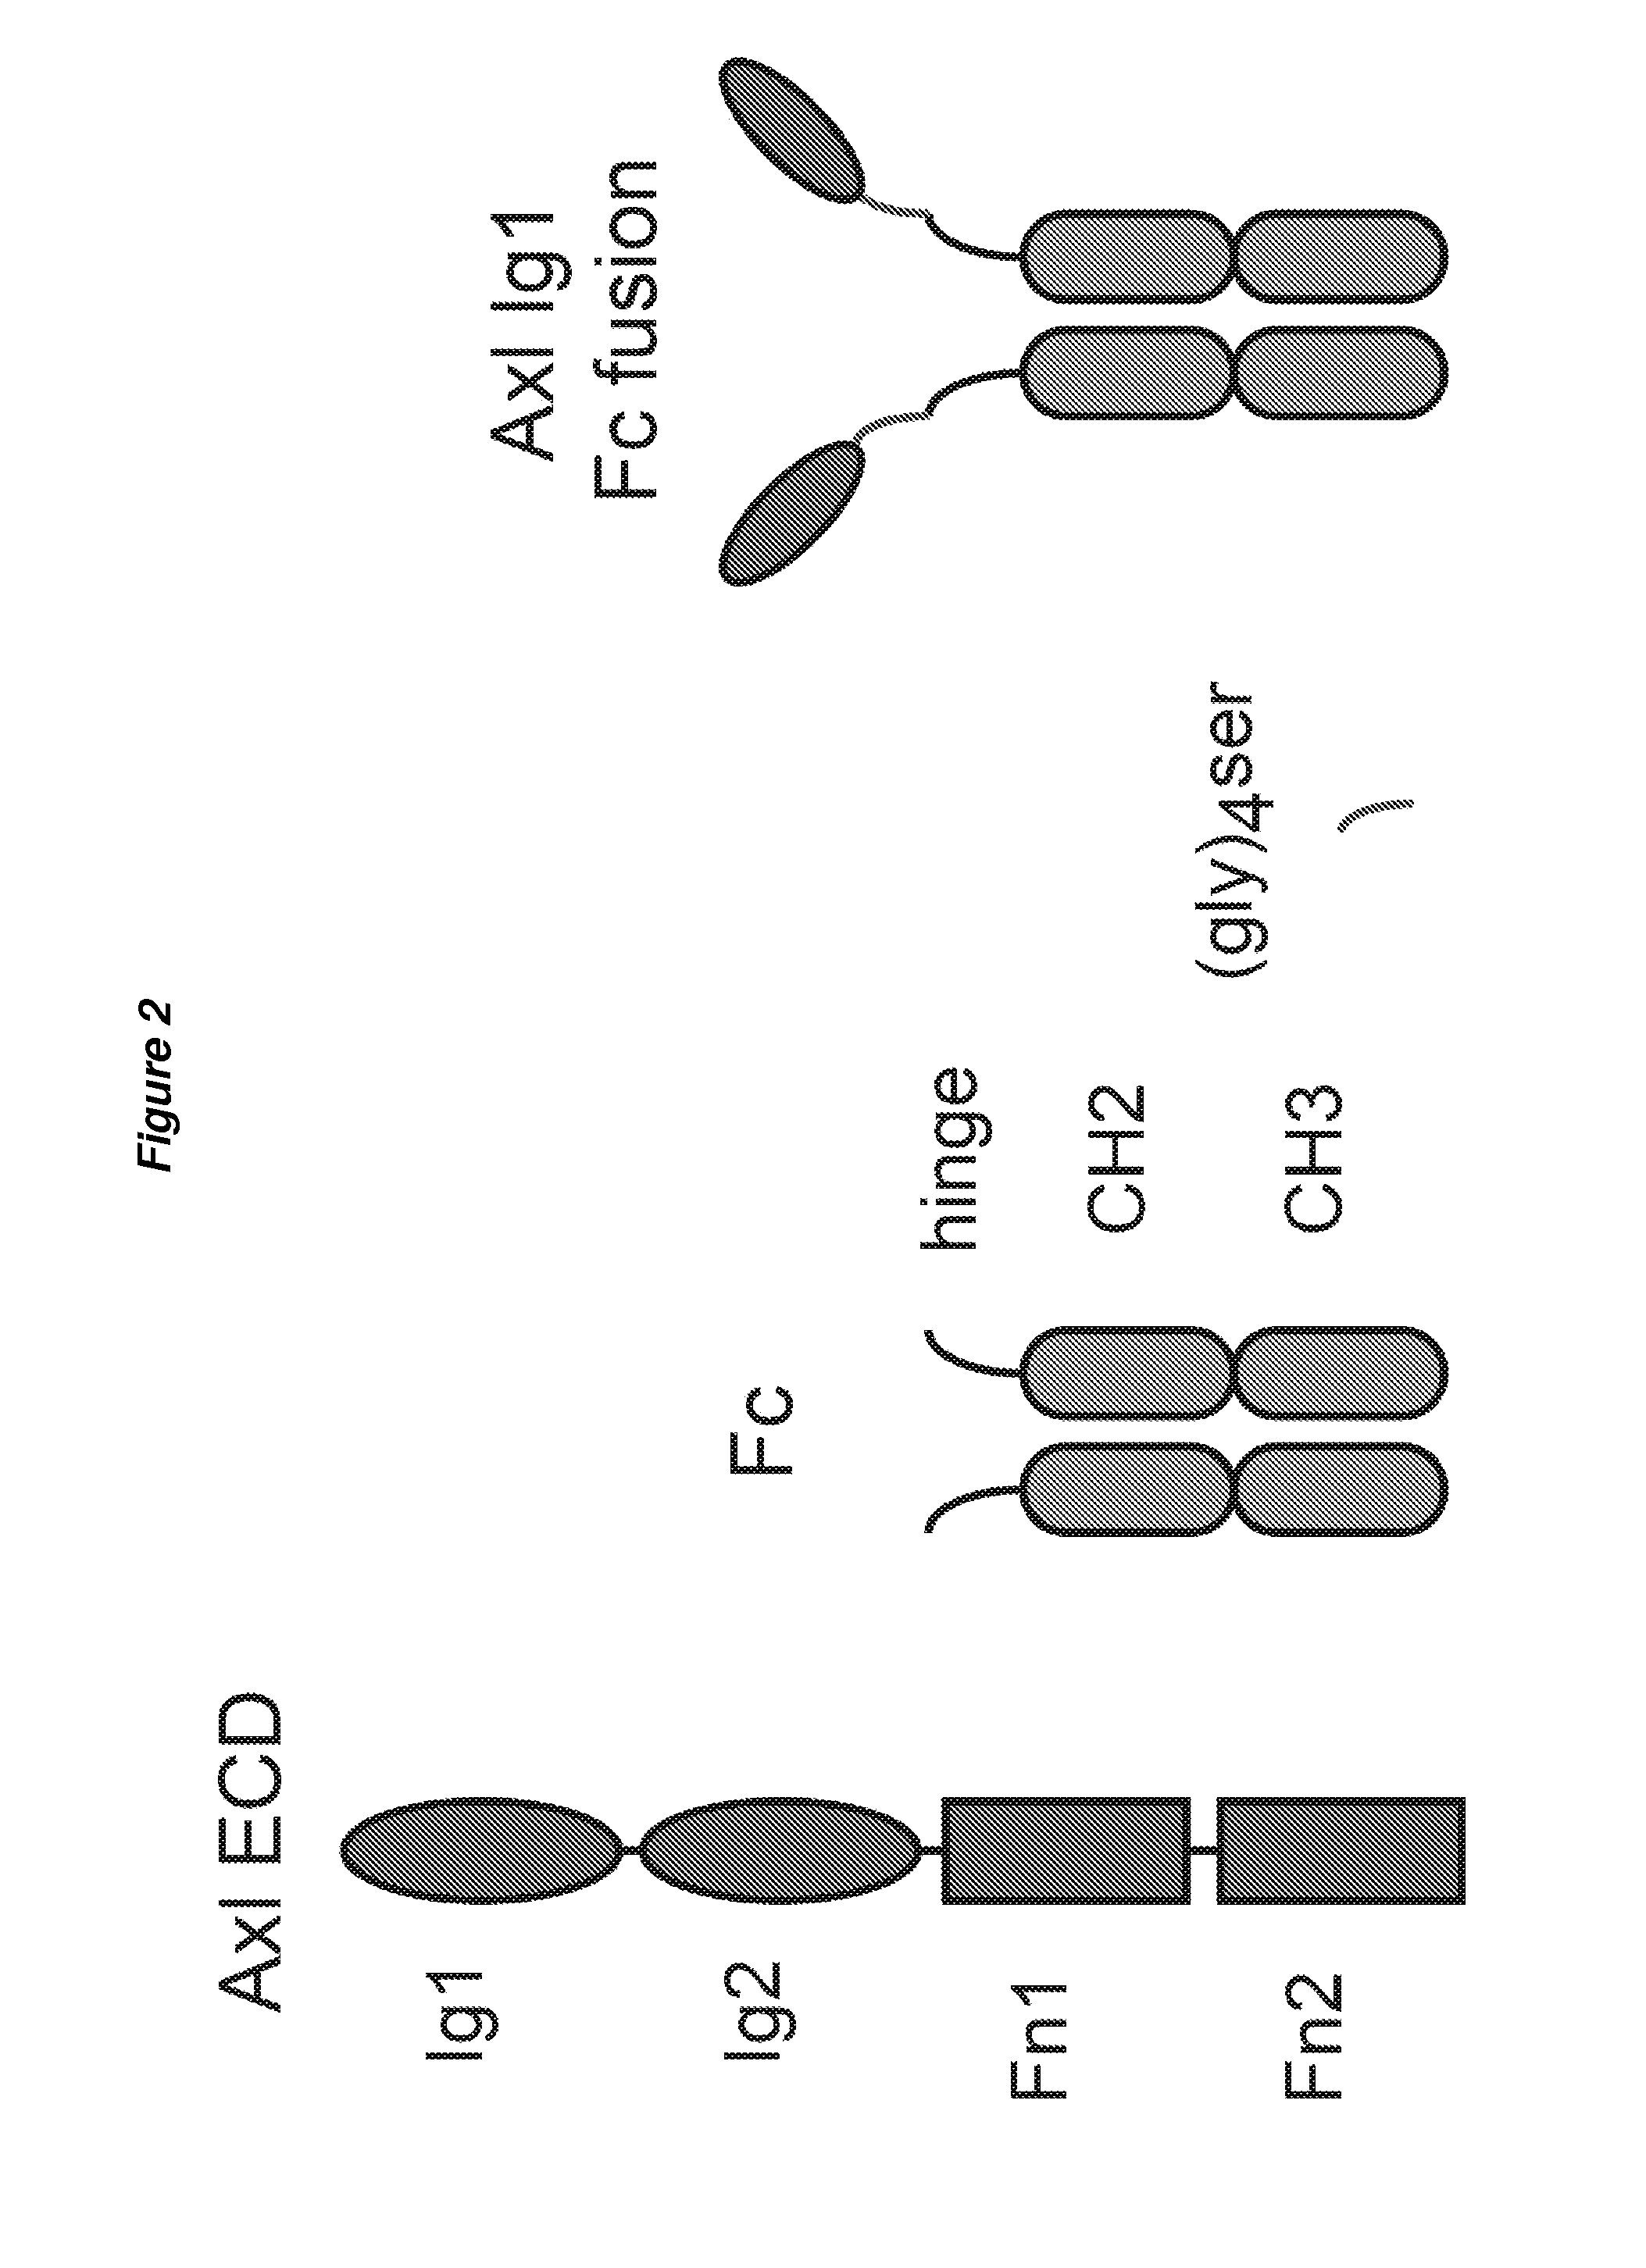 Modified AXL Peptides and Their Use in Inhibition of AXL Signaling in Anti-Metastatic Therapy